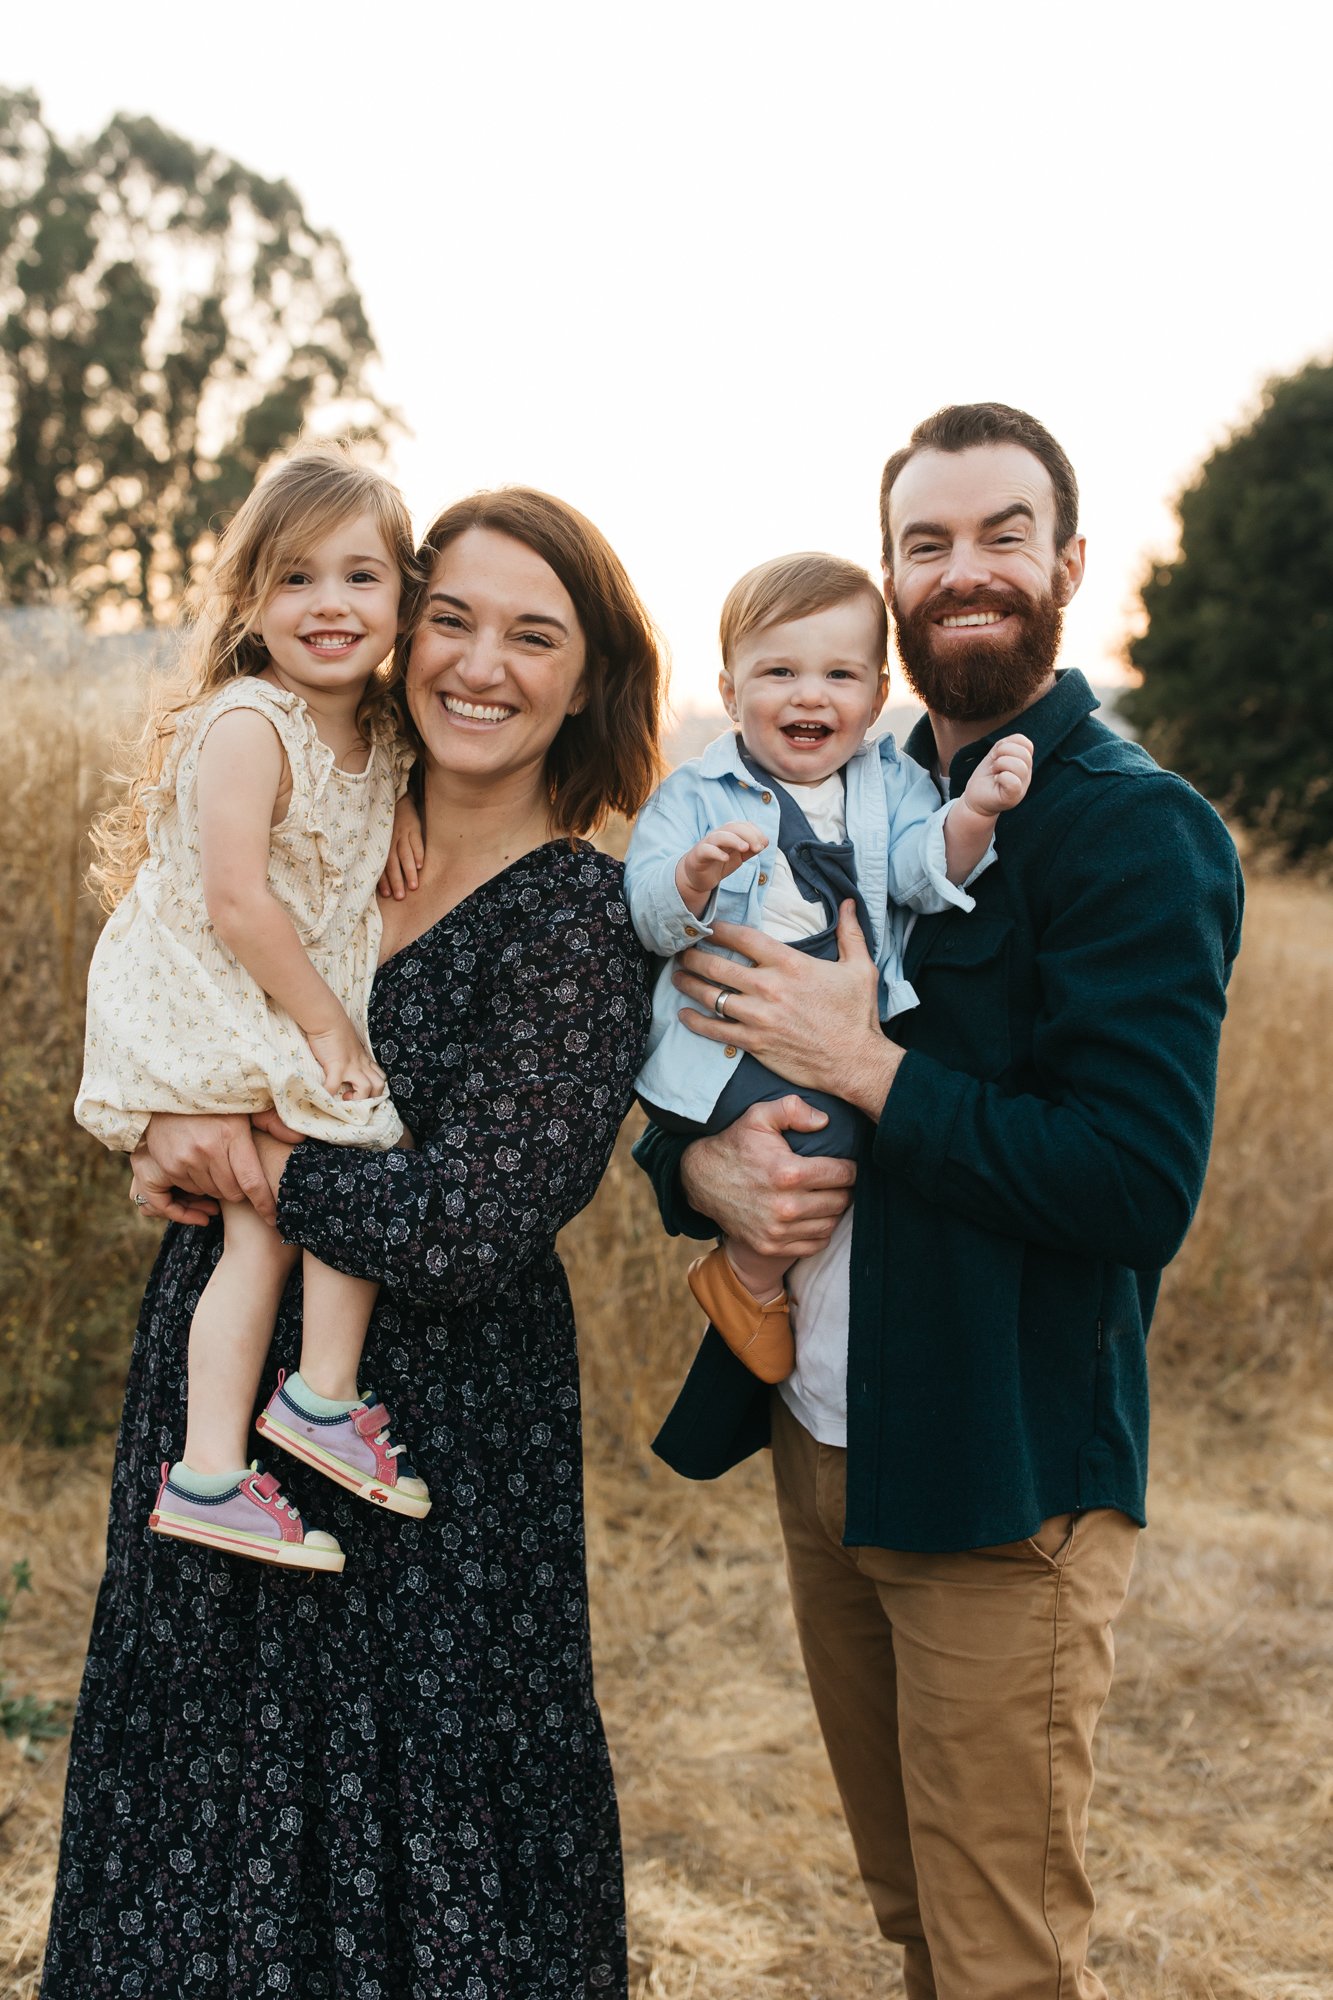 outdoor family outfit photo ideas from san francisco family photographer and marin family photographer Cristin More_7.jpg